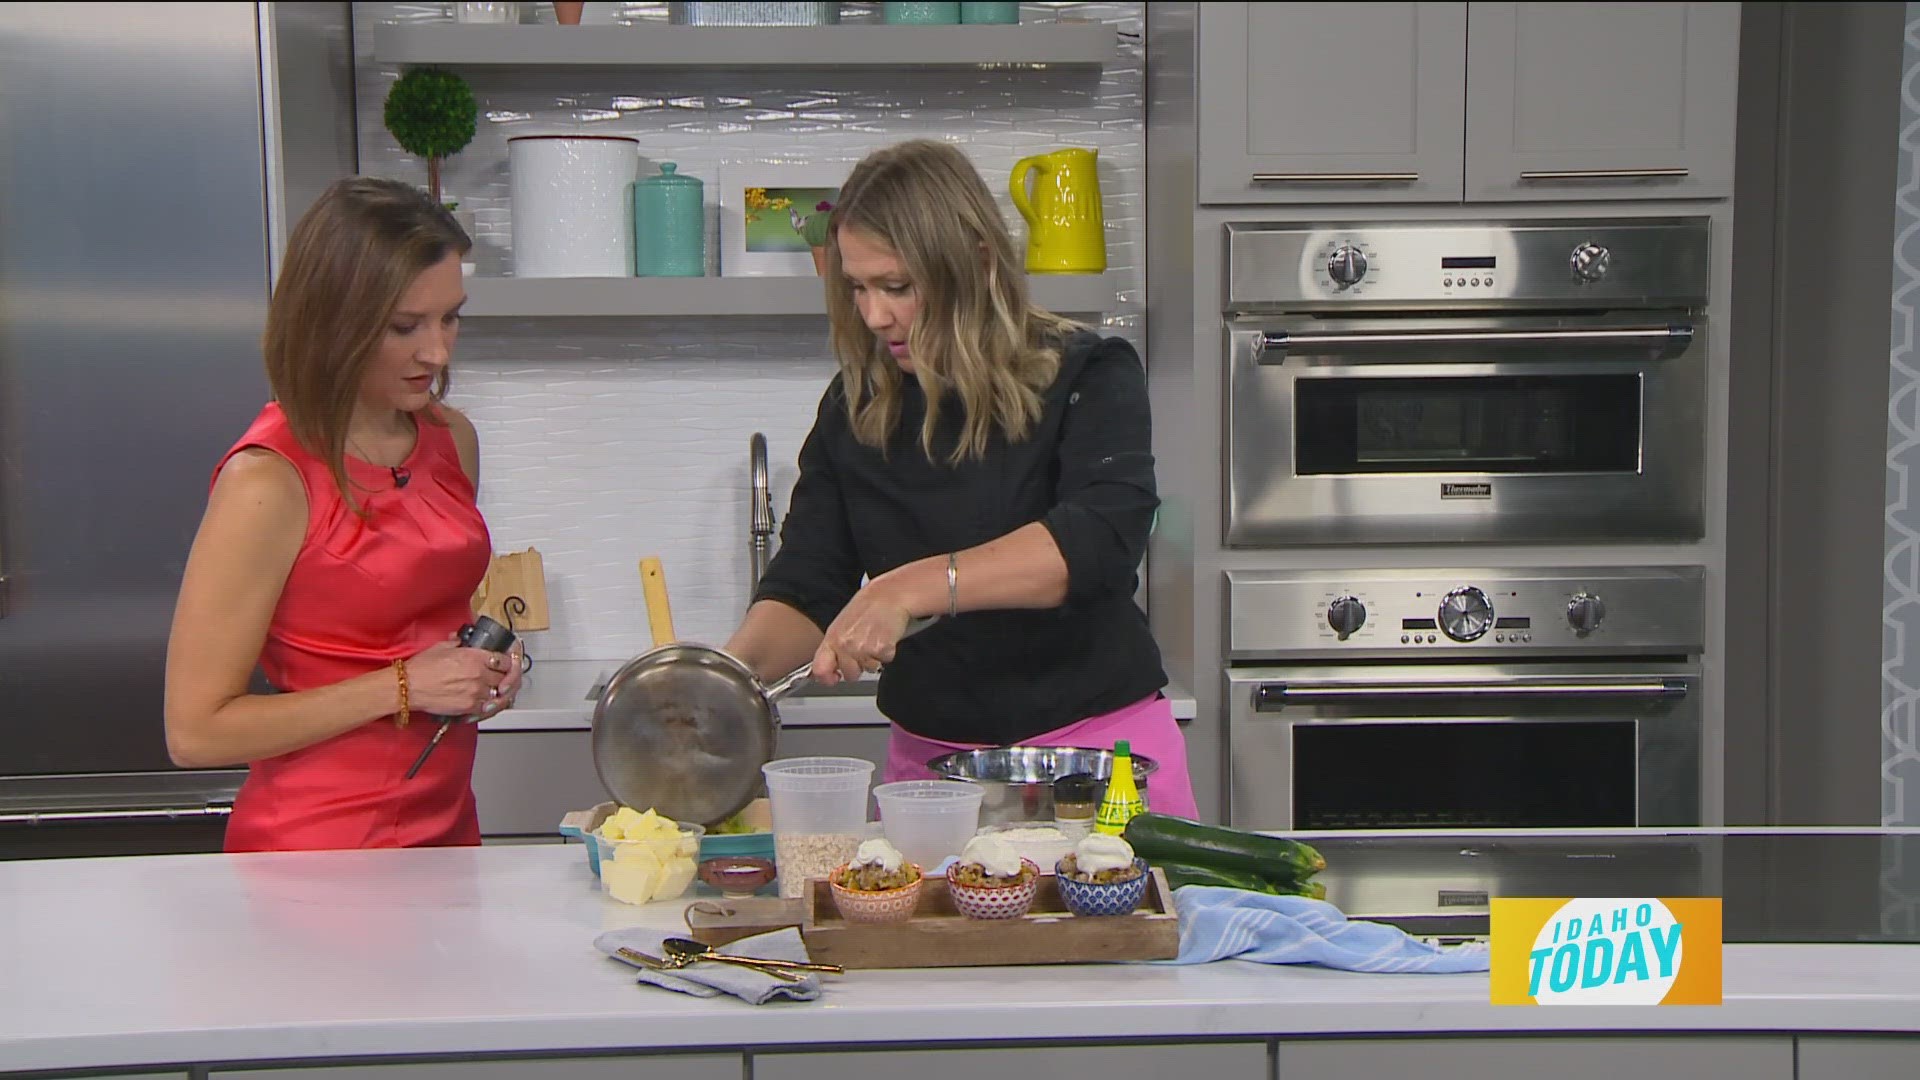 Chef Christina Murray shares her secret recipe with Idaho Today’s Mellisa Paul. It’s the perfect way to get even the pickiest veggie eaters to clean their plate!